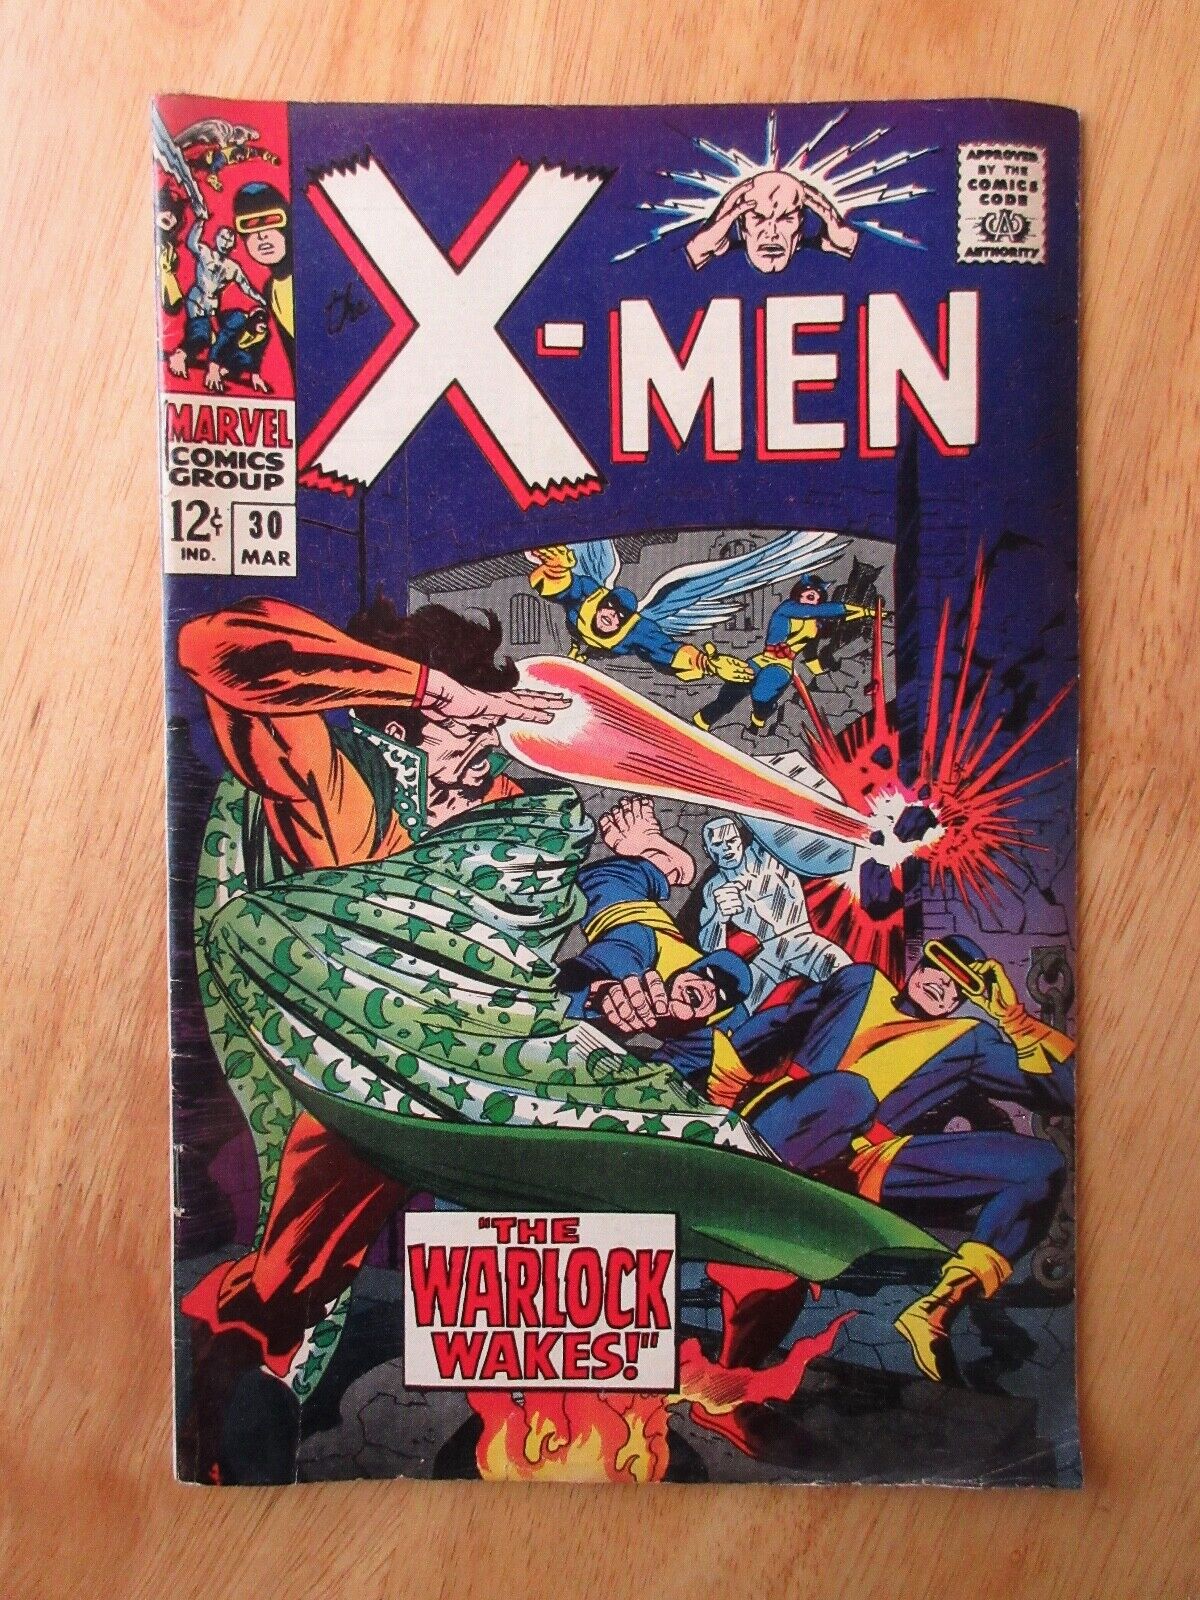 X-MEN #30 (1967) **Very Bright & Colorful** (FN+—Needs a Press)